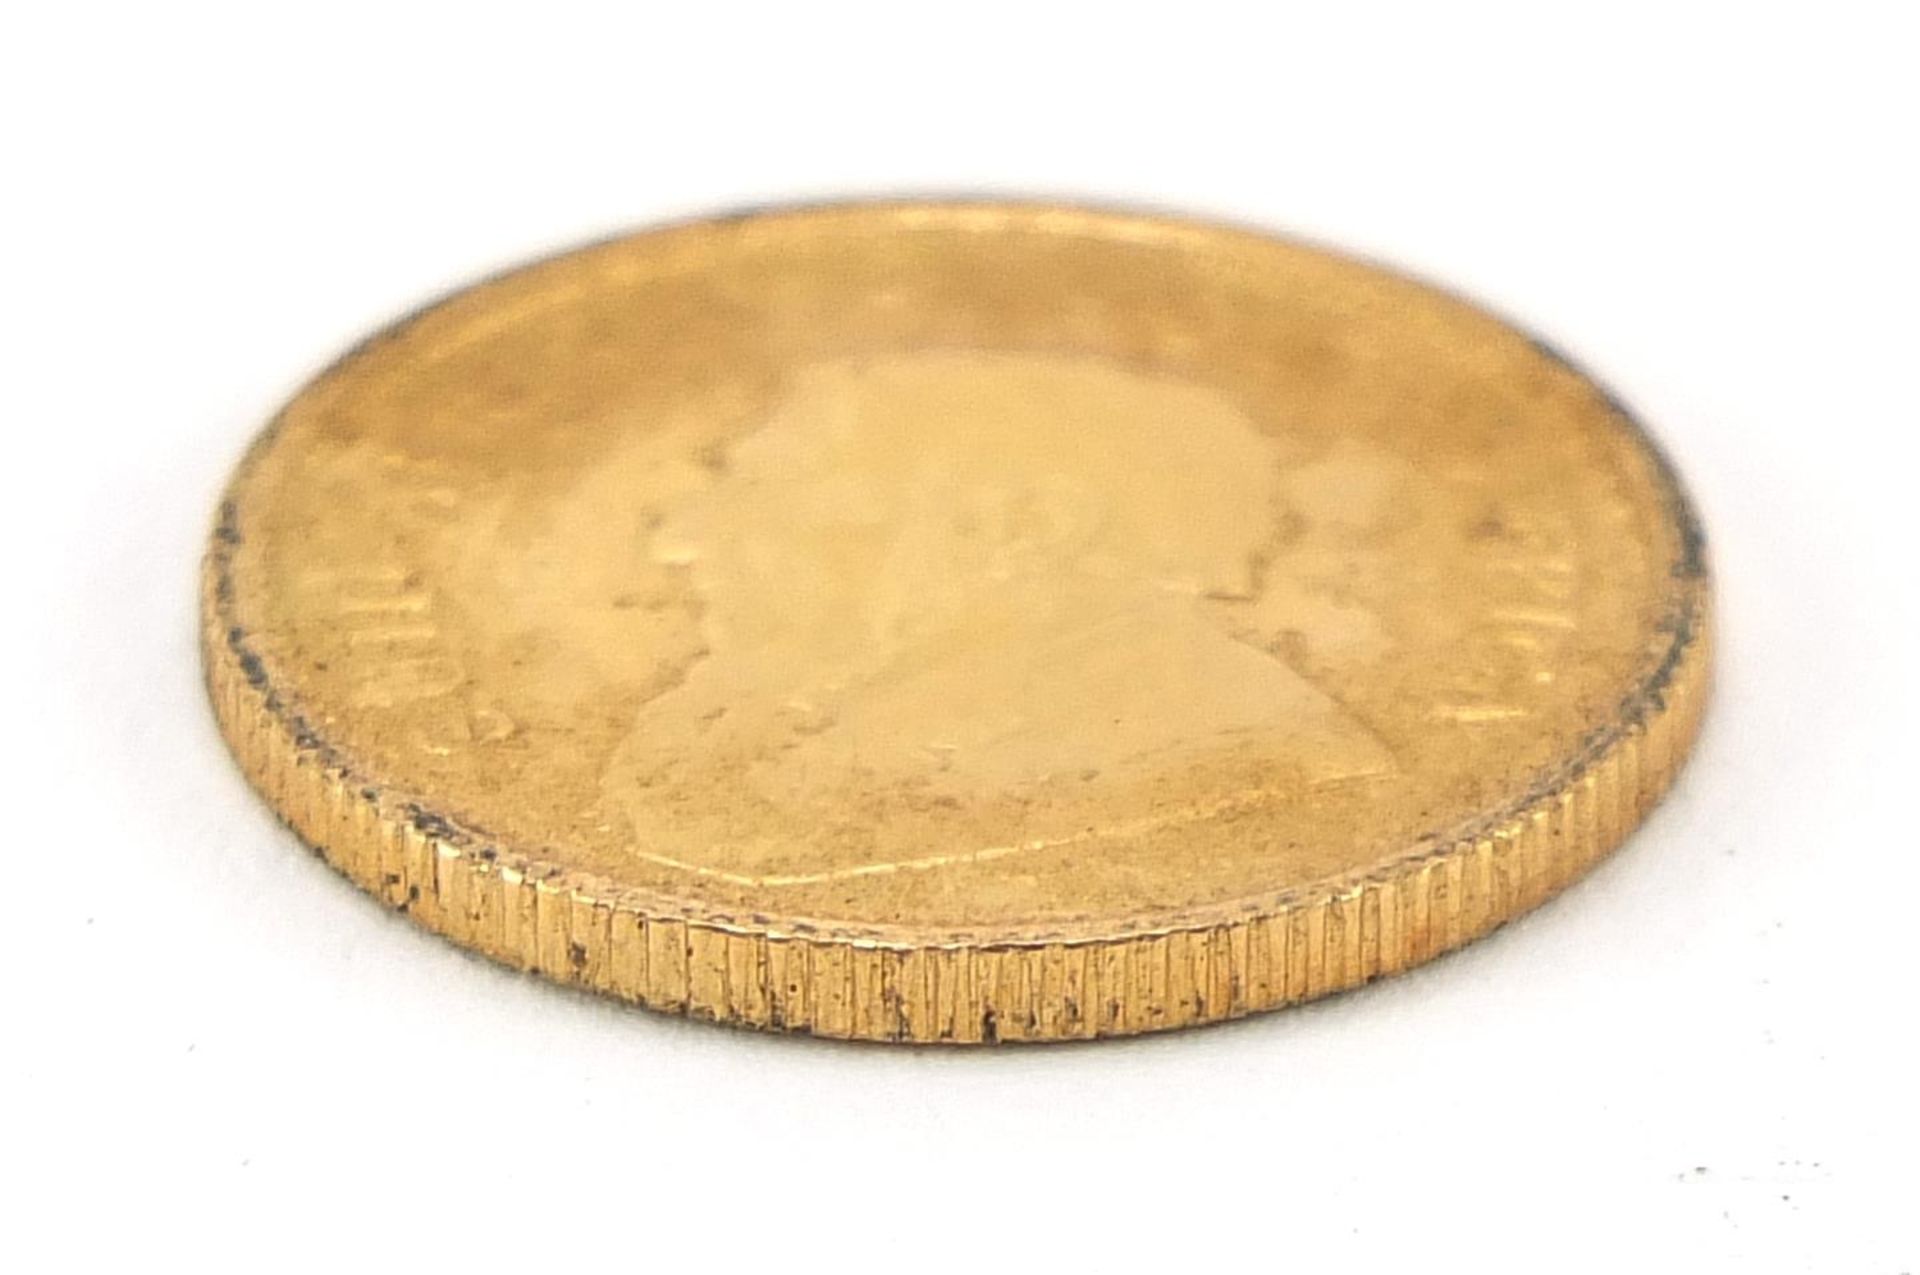 South African 1982 1/10th gold krugerrand - this lot is sold without buyer's premium - Image 3 of 3